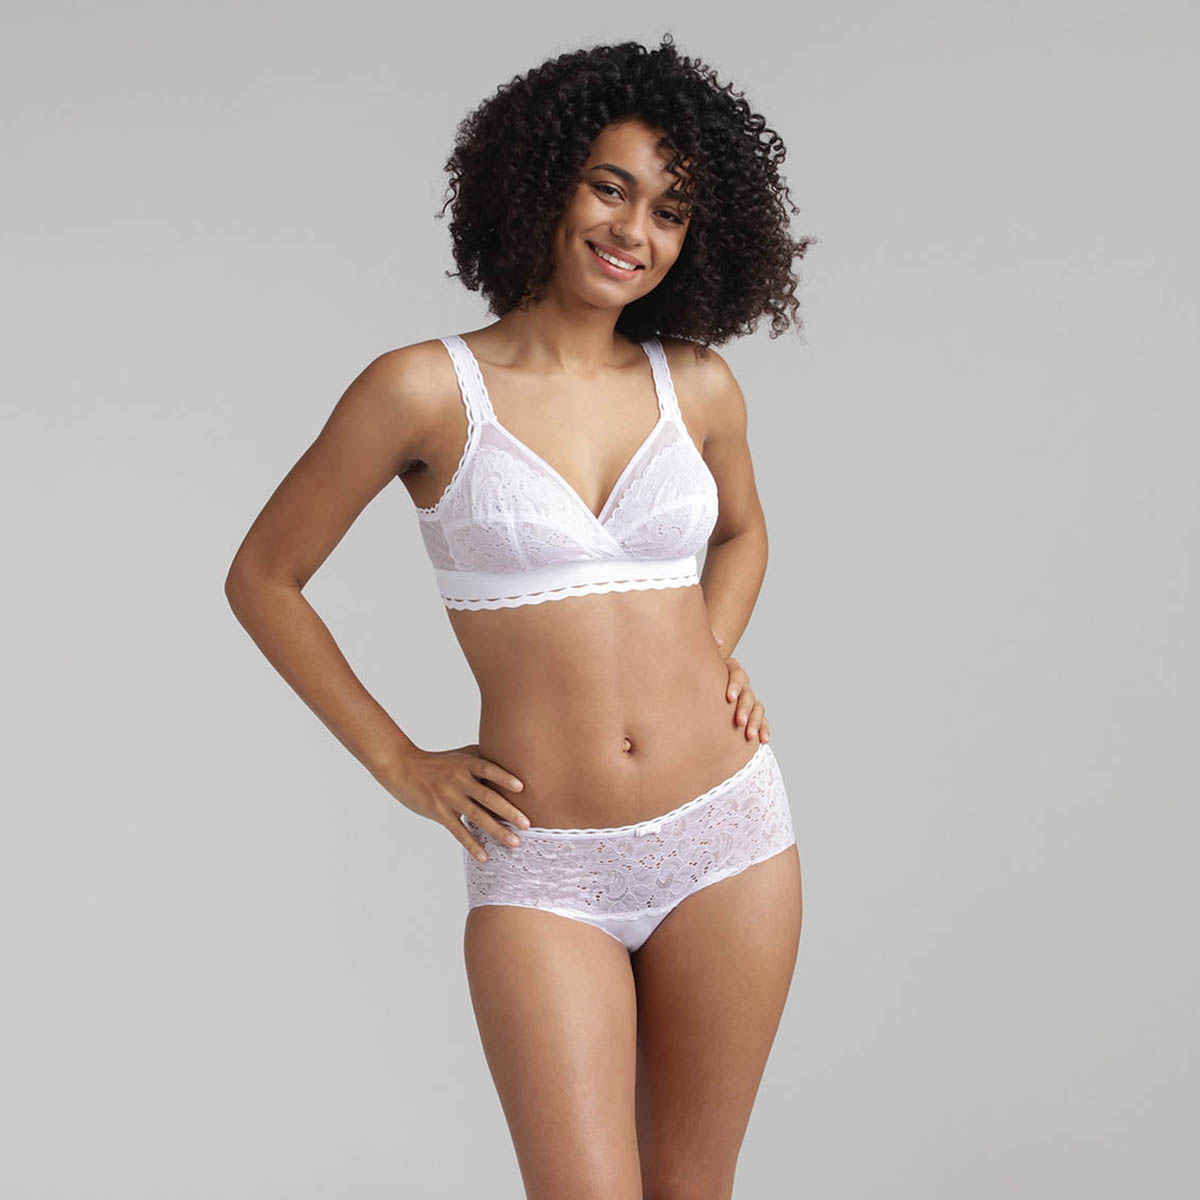 Knickers in white - Recycled Classic Lace Support, , PLAYTEX